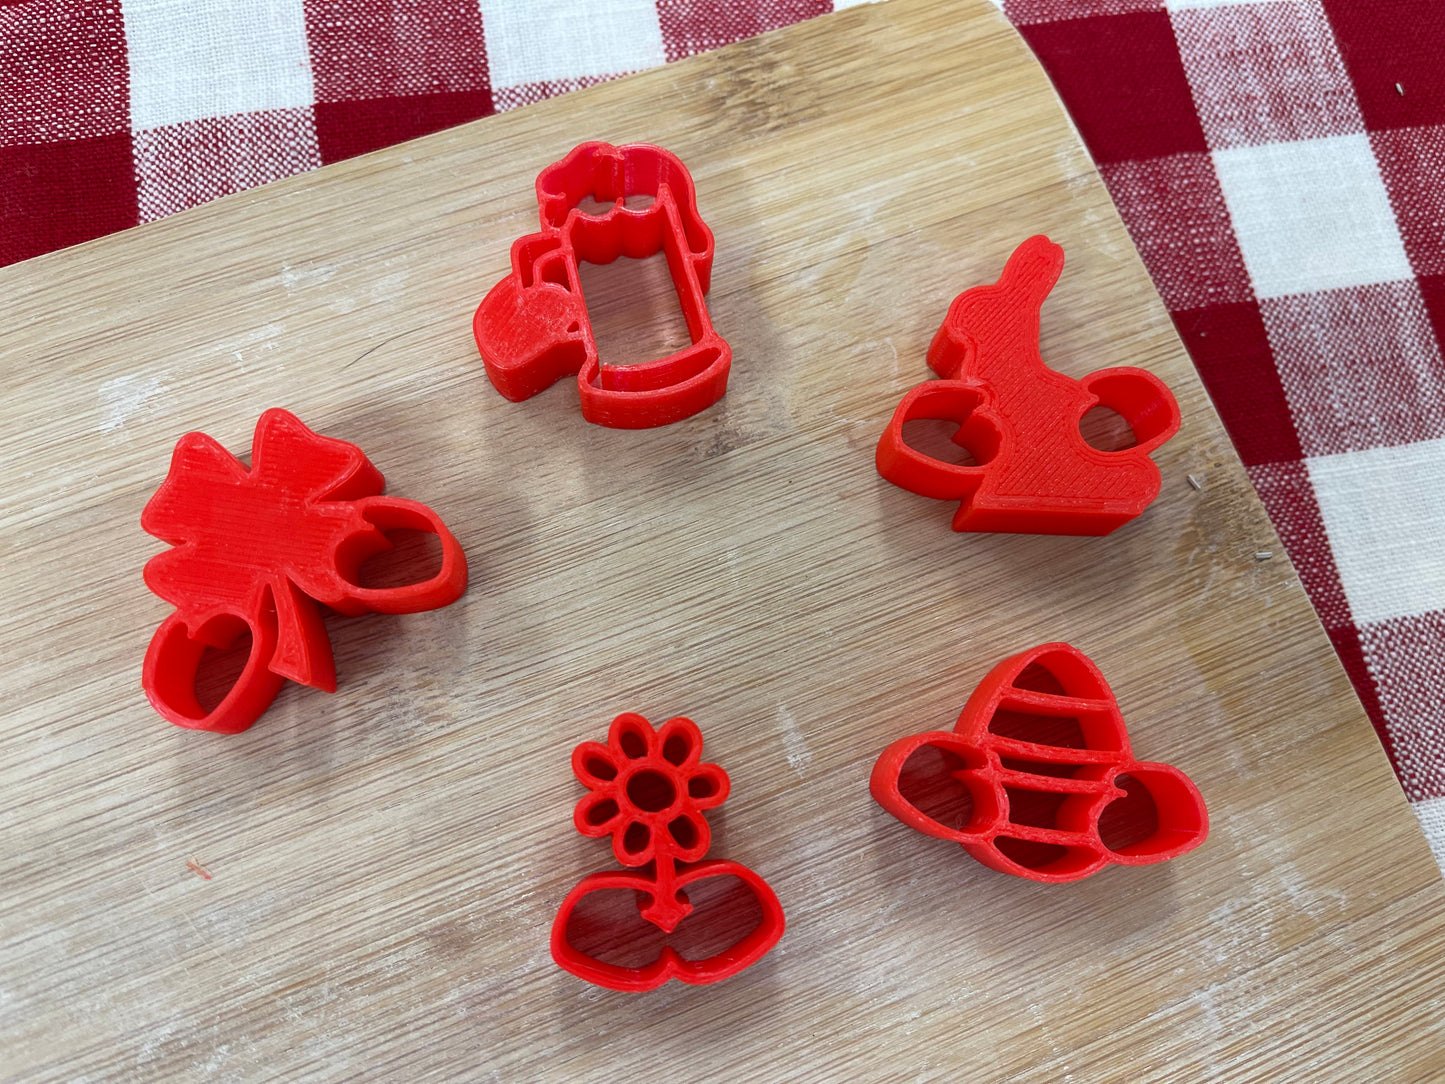 Gnome hands extras stamps, Spring / Easter / St. Pats designs - plastic 3D printed, multiple sizes